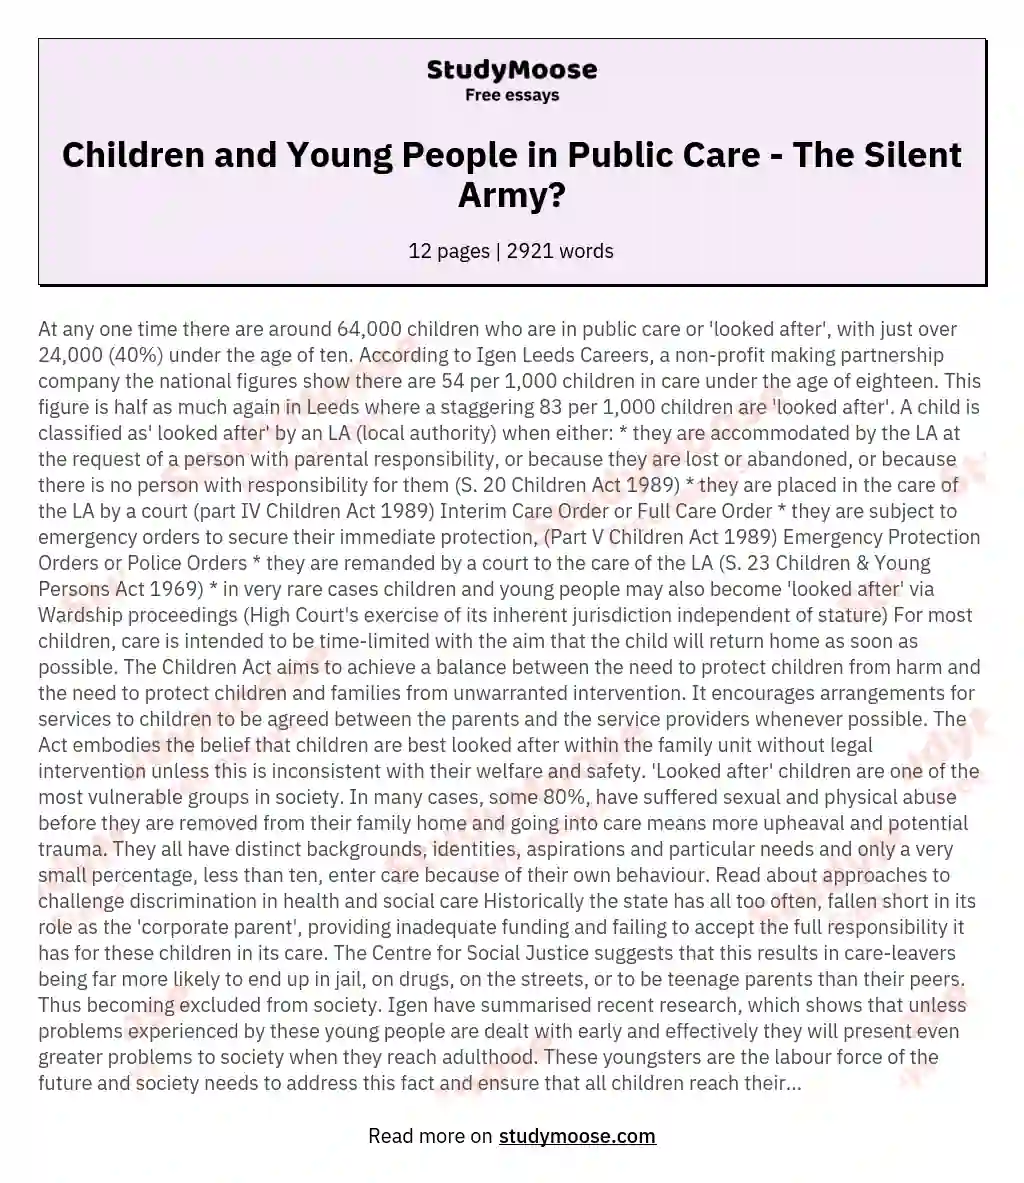 Children and Young People in Public Care - The Silent Army?